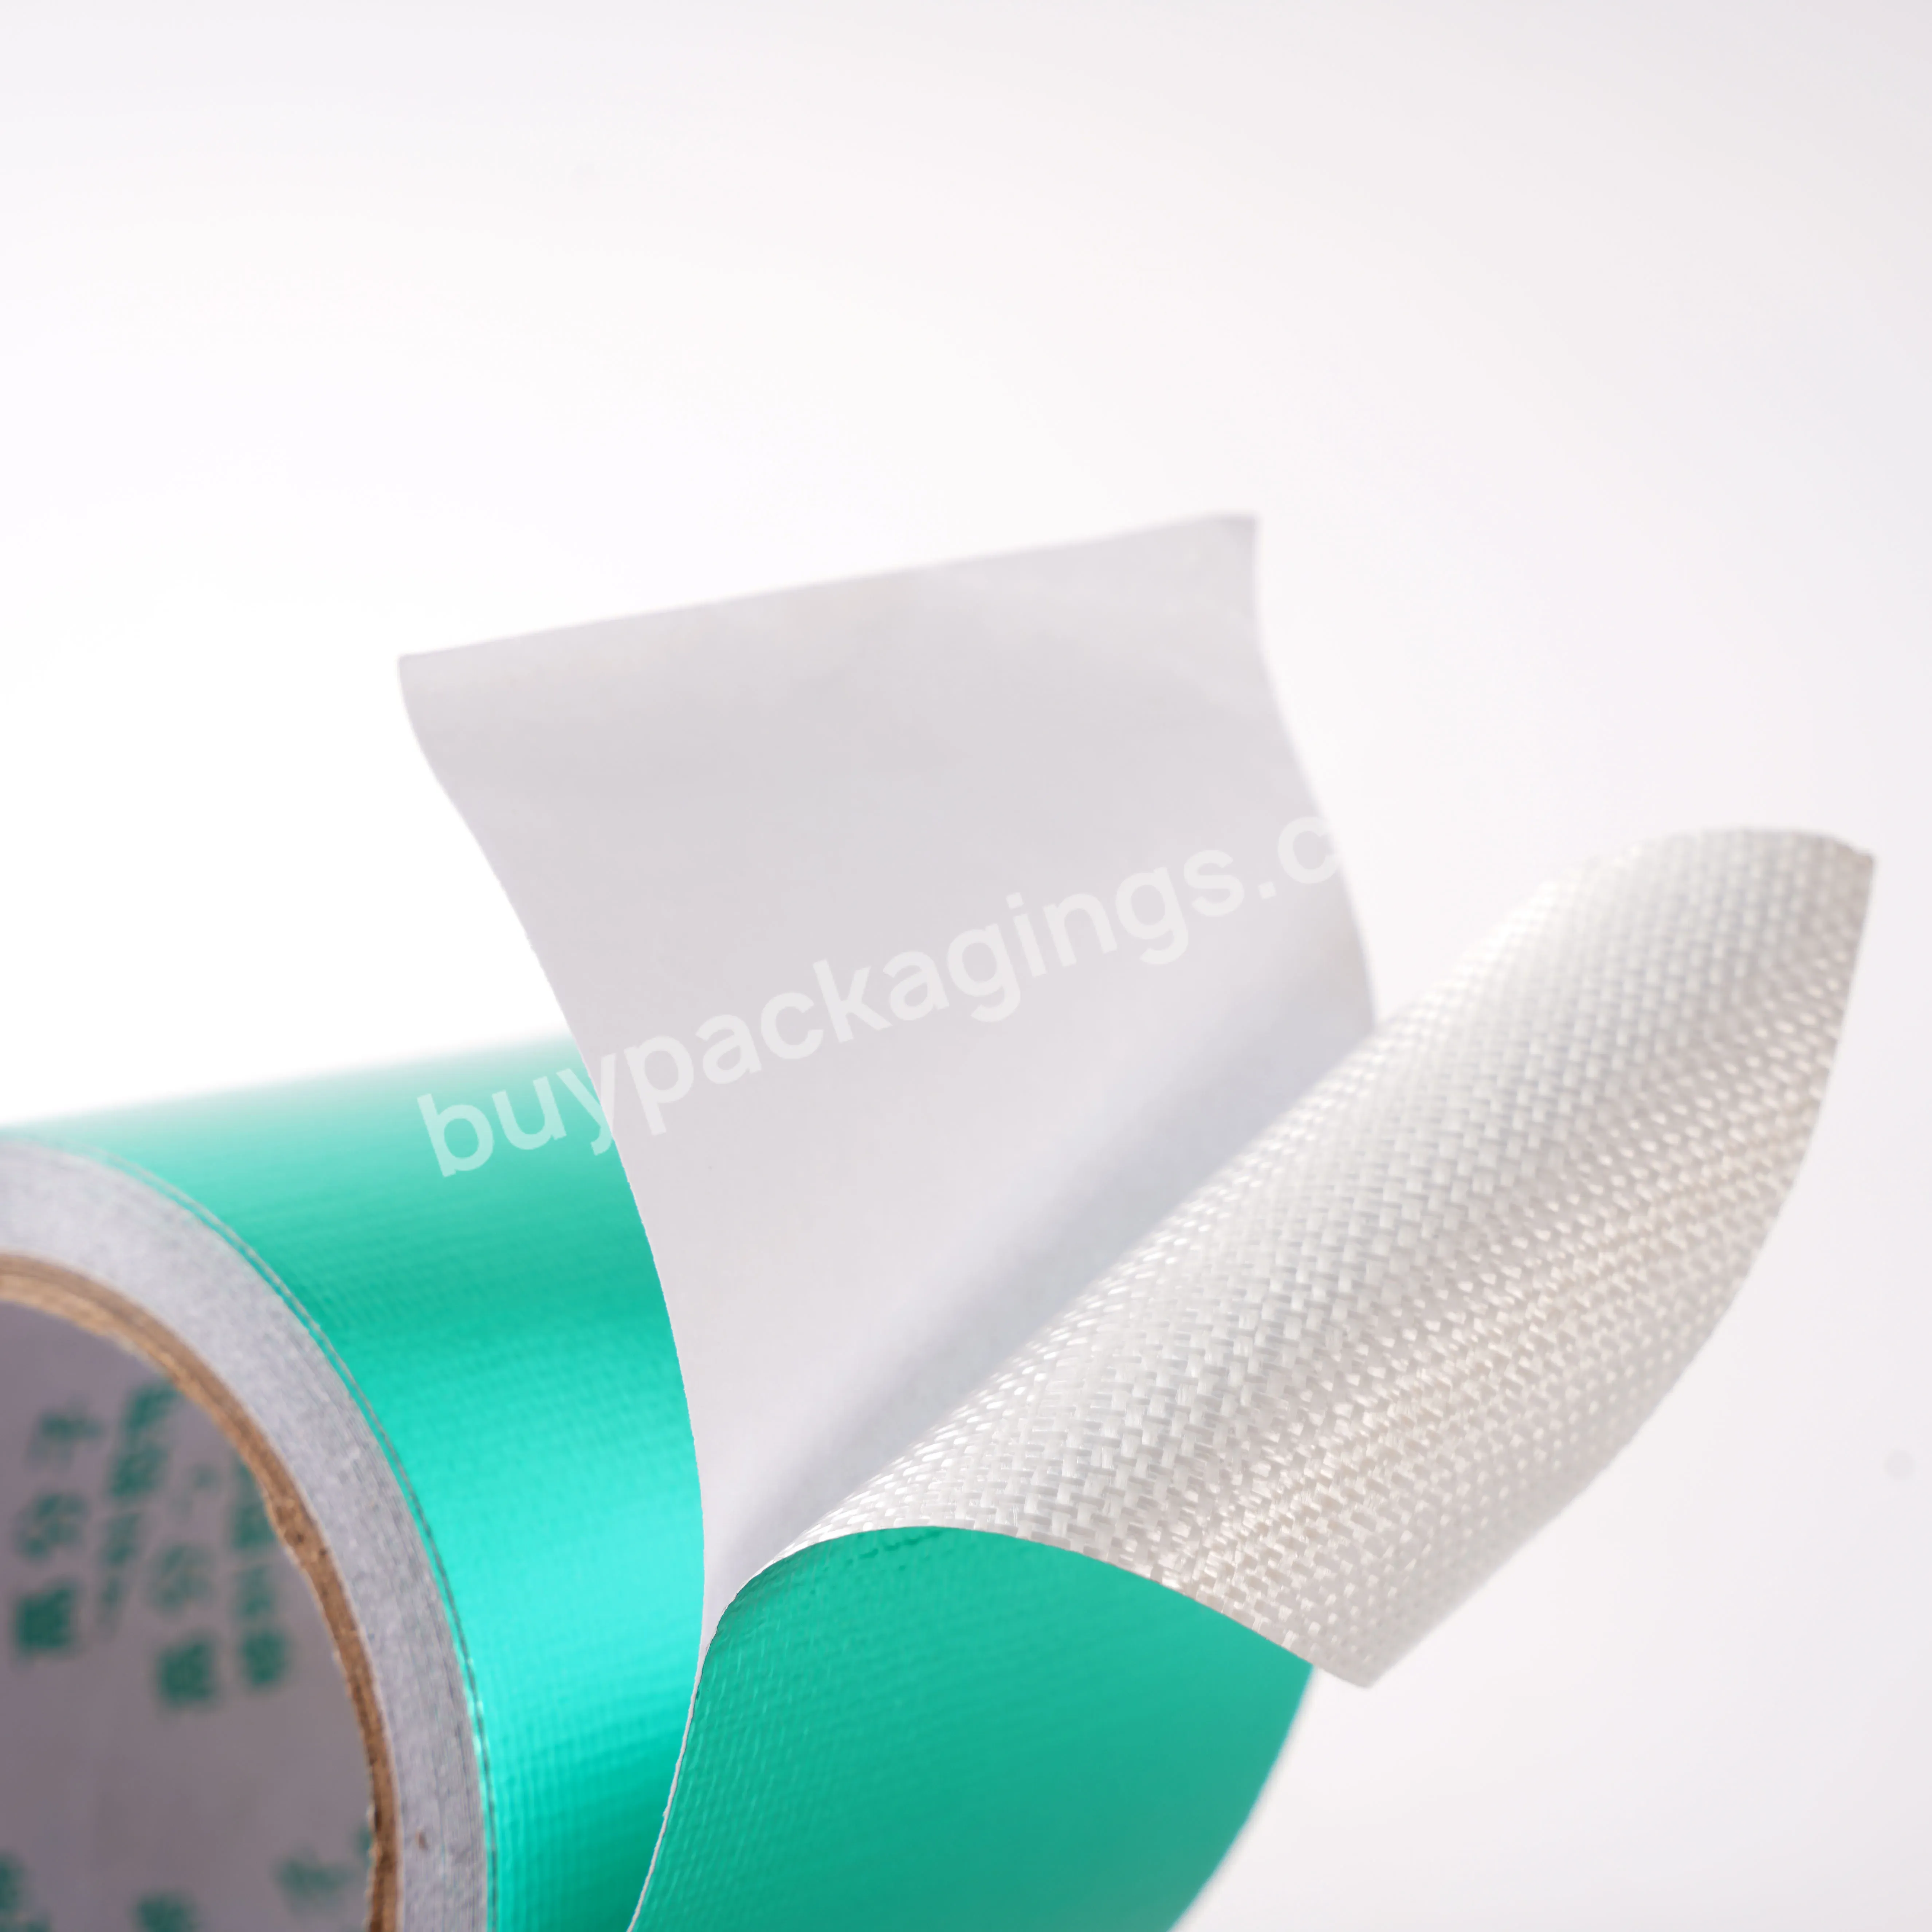 Pvc Tarpaulin Tape China Factory Wholesale Waterproof,Sunscreen And Abrasion Resistant - Buy Pvc Repair Adhesive Tape,China Factory Waterproof Self-adhesive Repair Tape,Adhesive Tape Manufacturing.